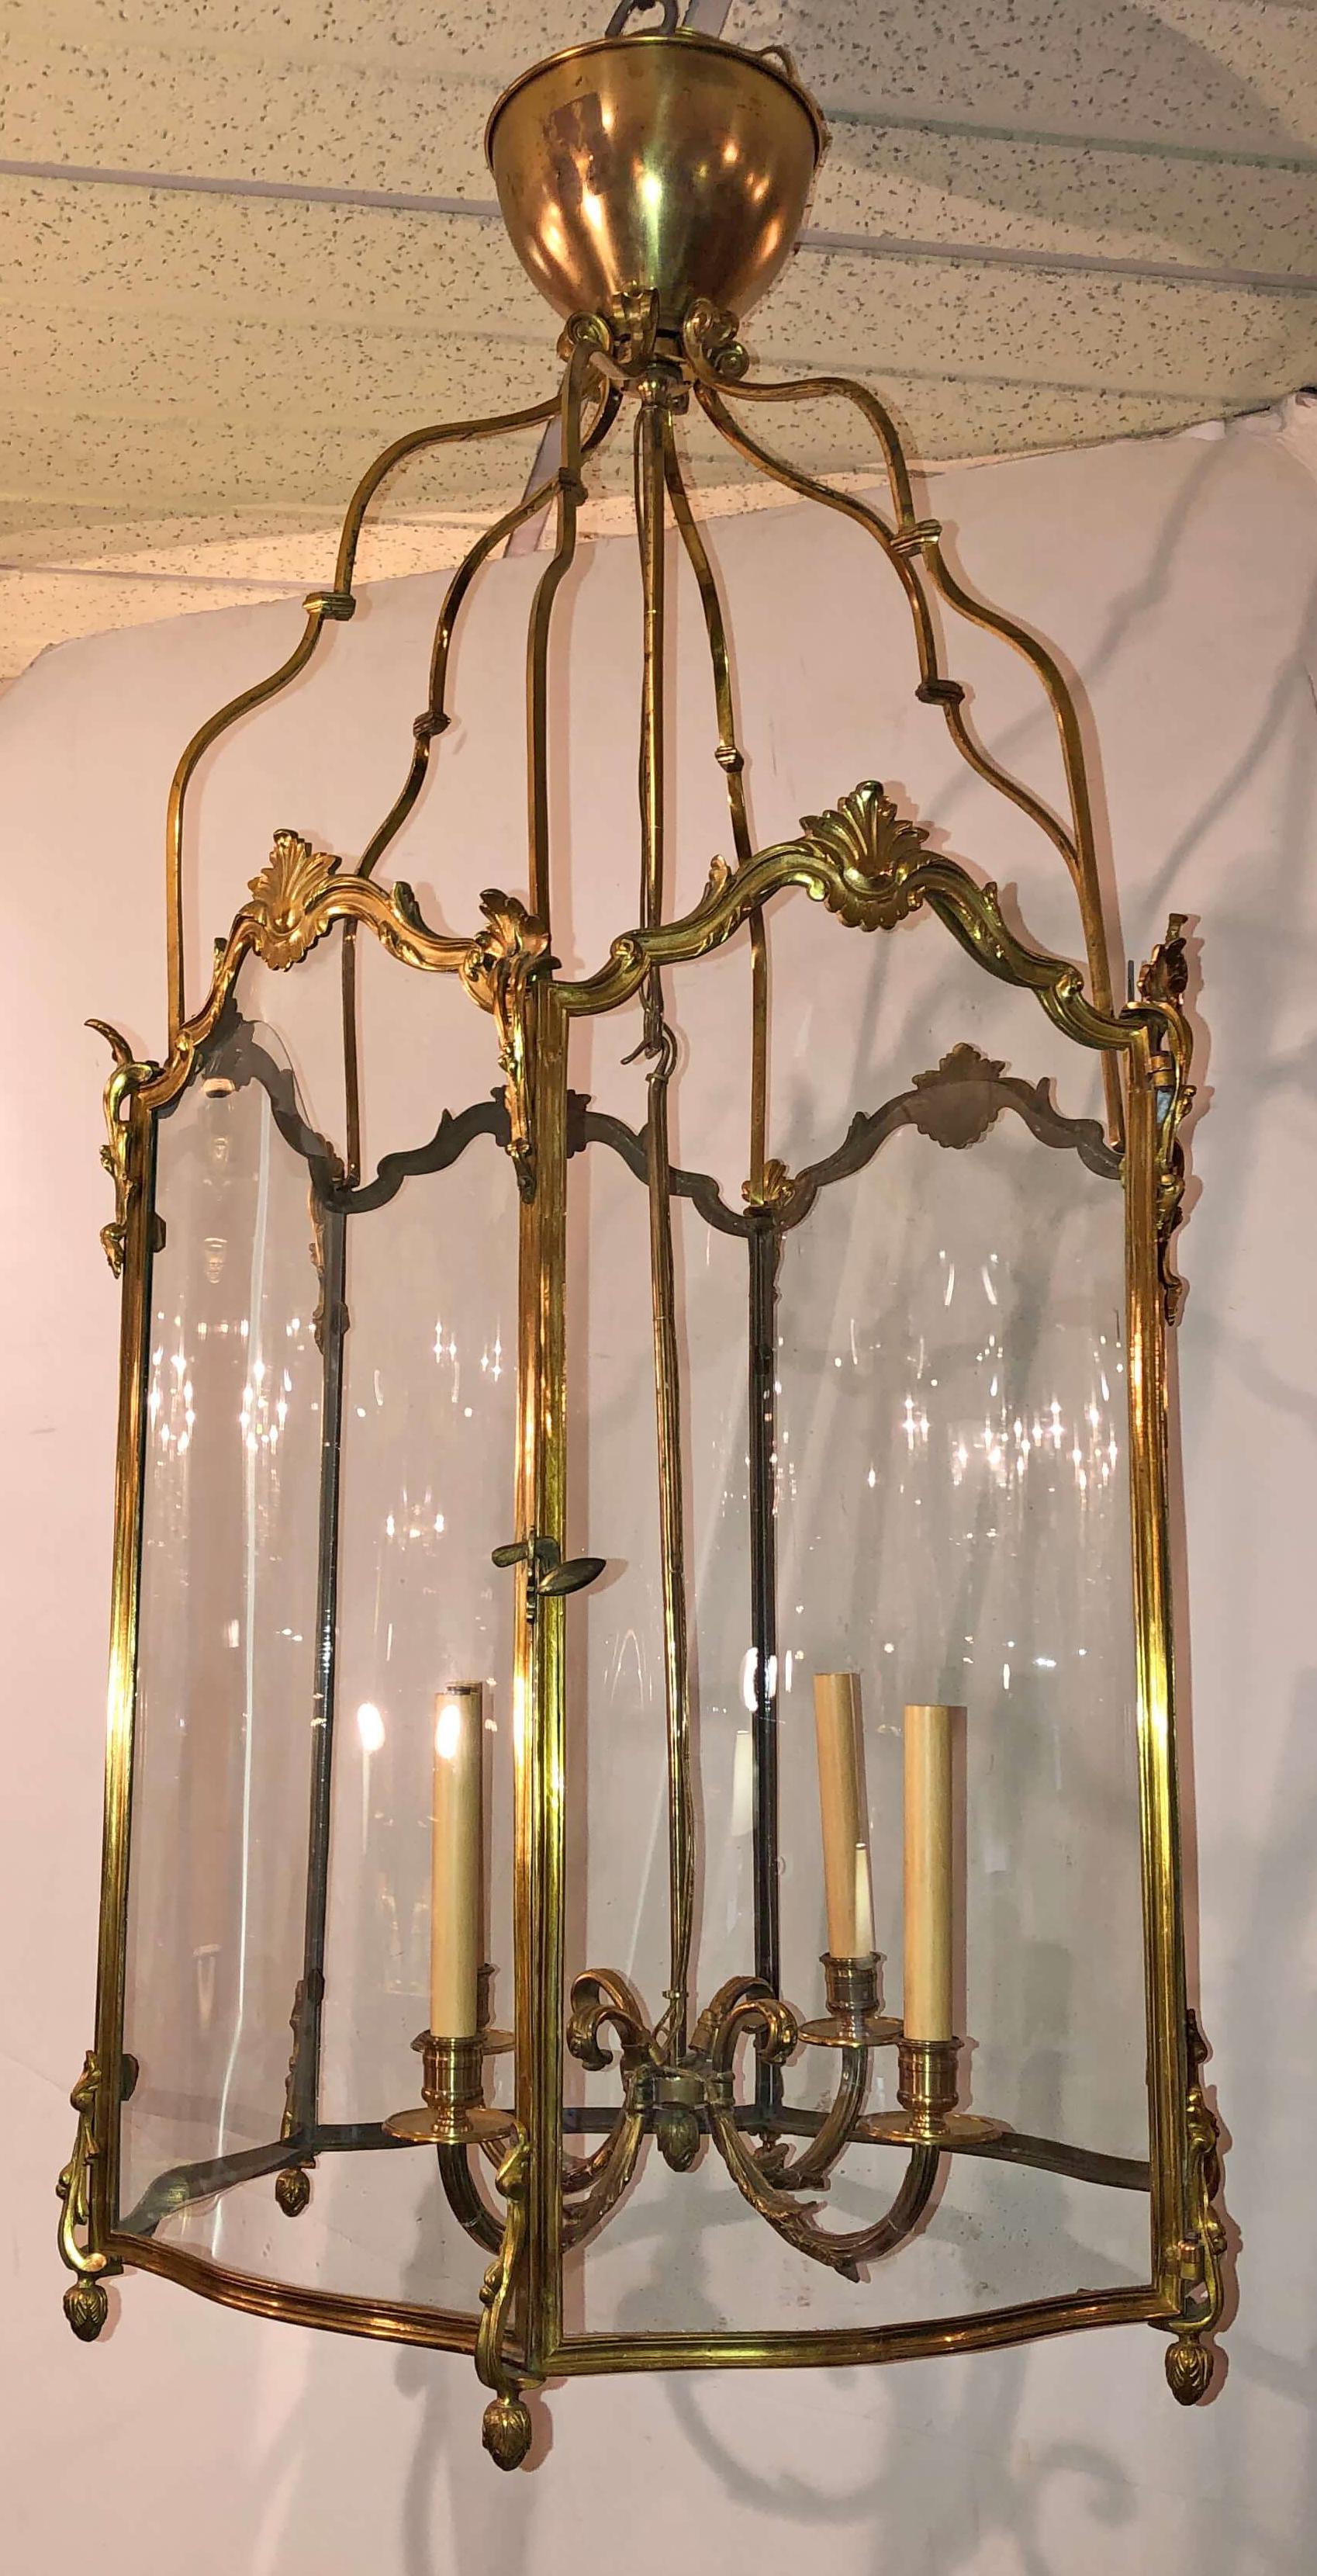 A fine and large French gilt bronze hall lantern with serpentine glass sides, working door, four-light hanging cluster, acanthus leaf decor, and acorn finials.